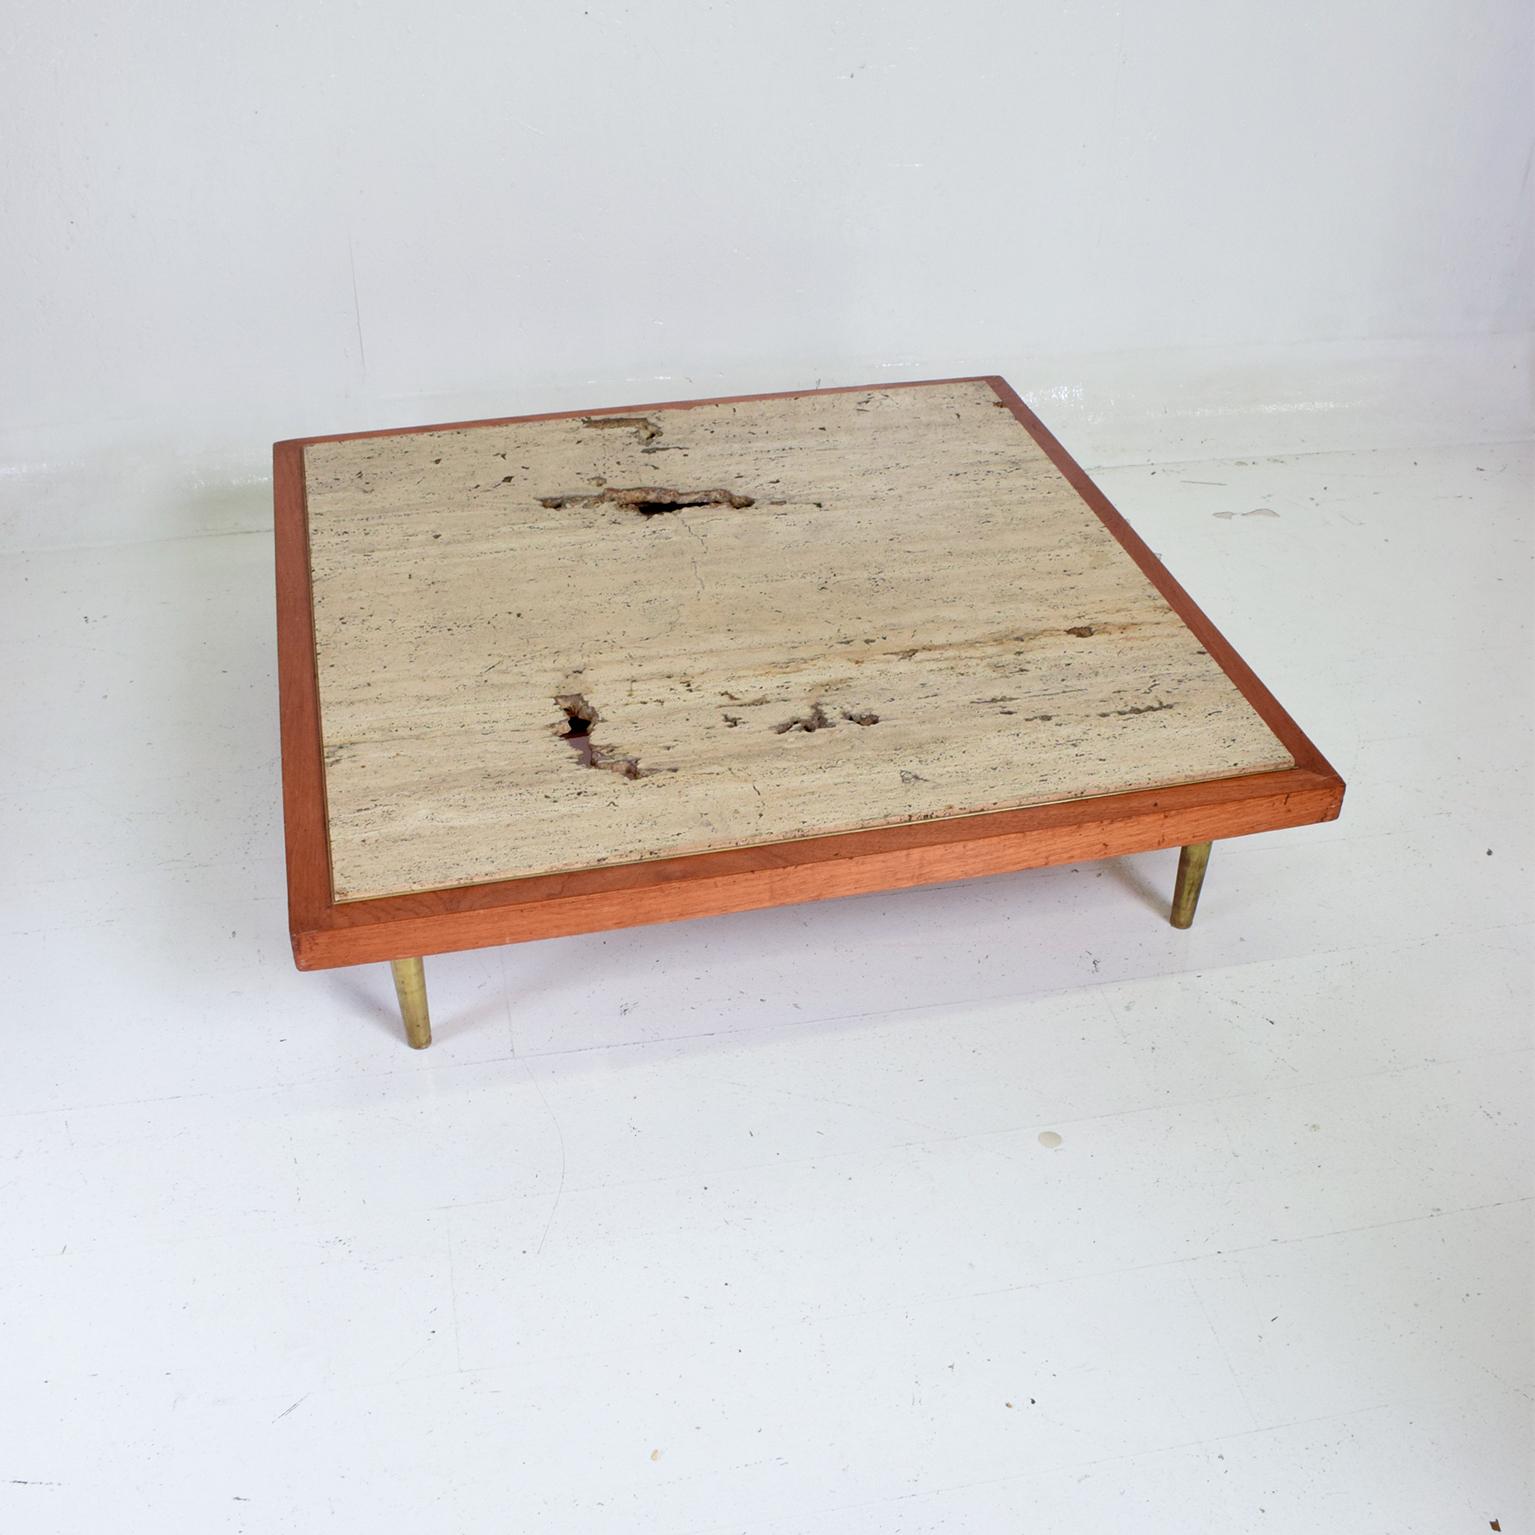 Patinated Frank Kyle Low Profile Coffee Table Travertine Mahogany Brass Hip 1960s